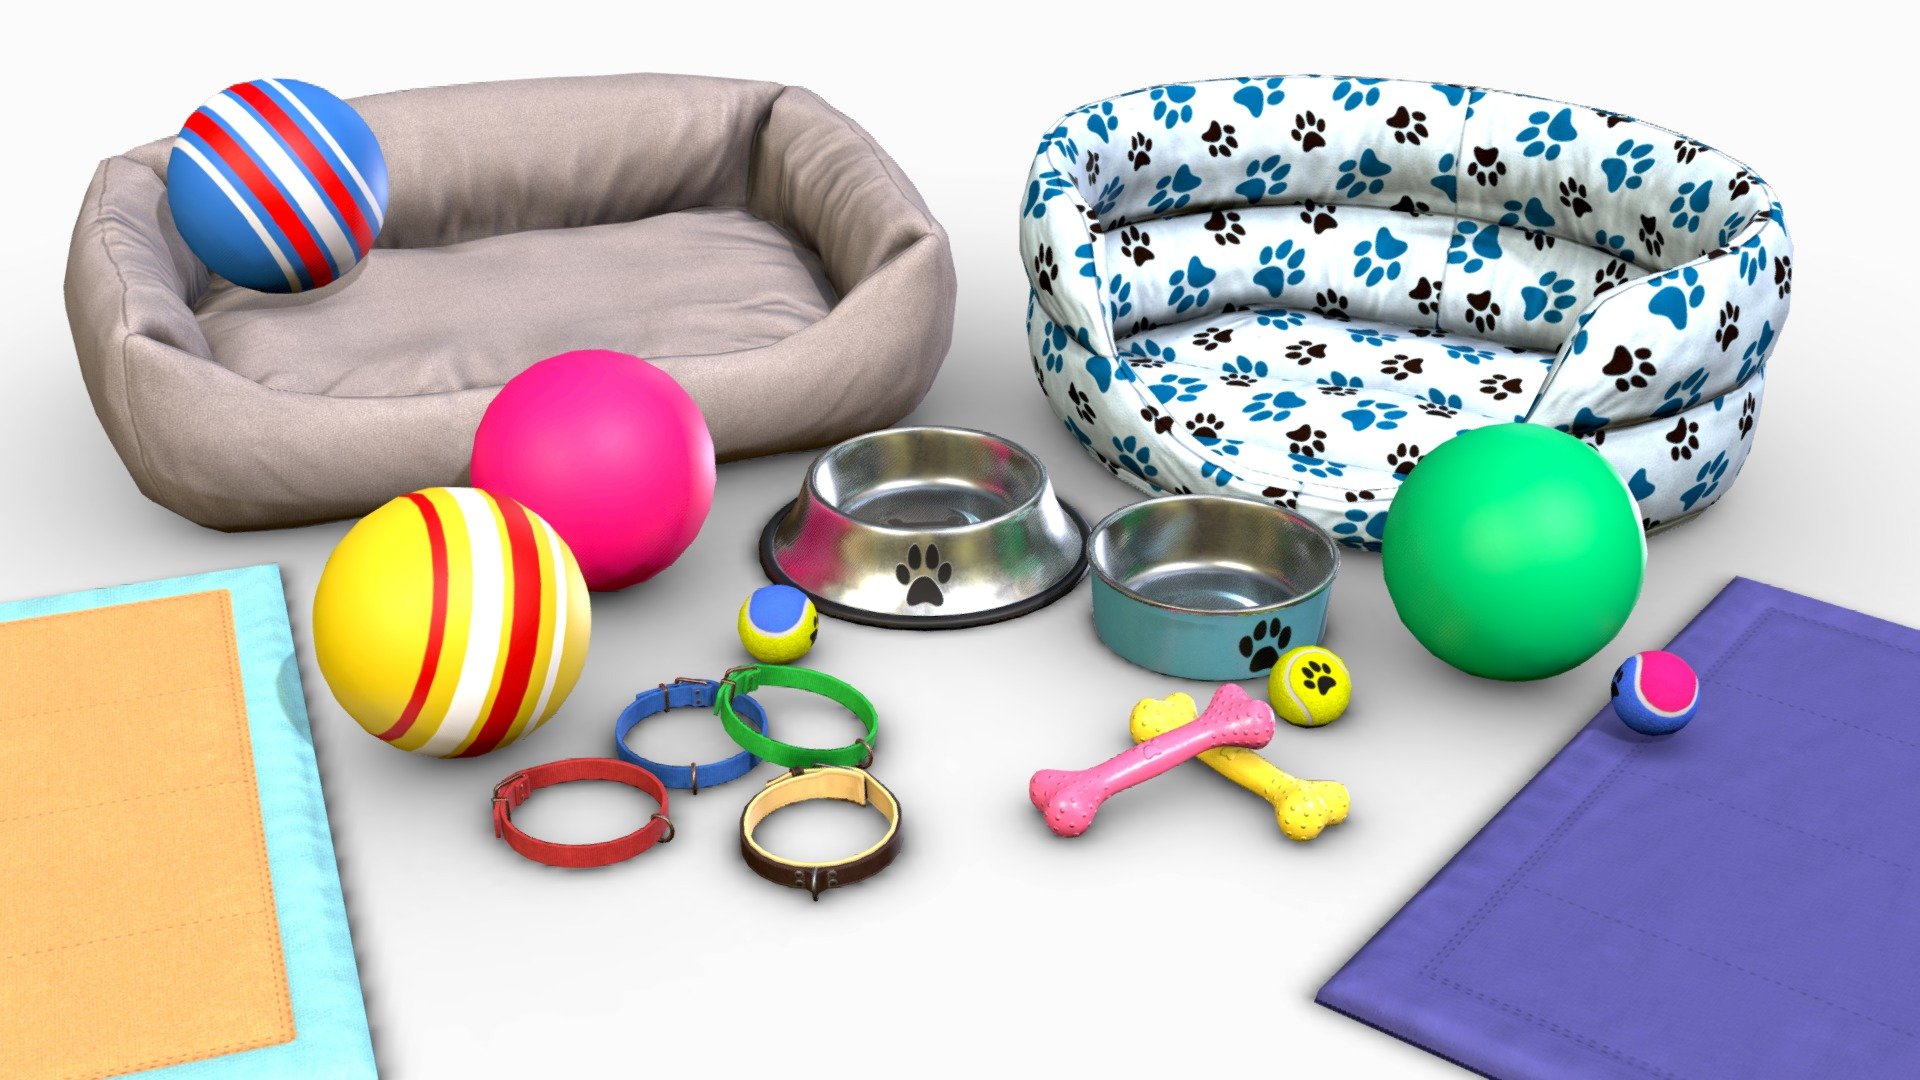 This asset contains puppy accessories. All models are low poly. The source files are in attachments 3d model